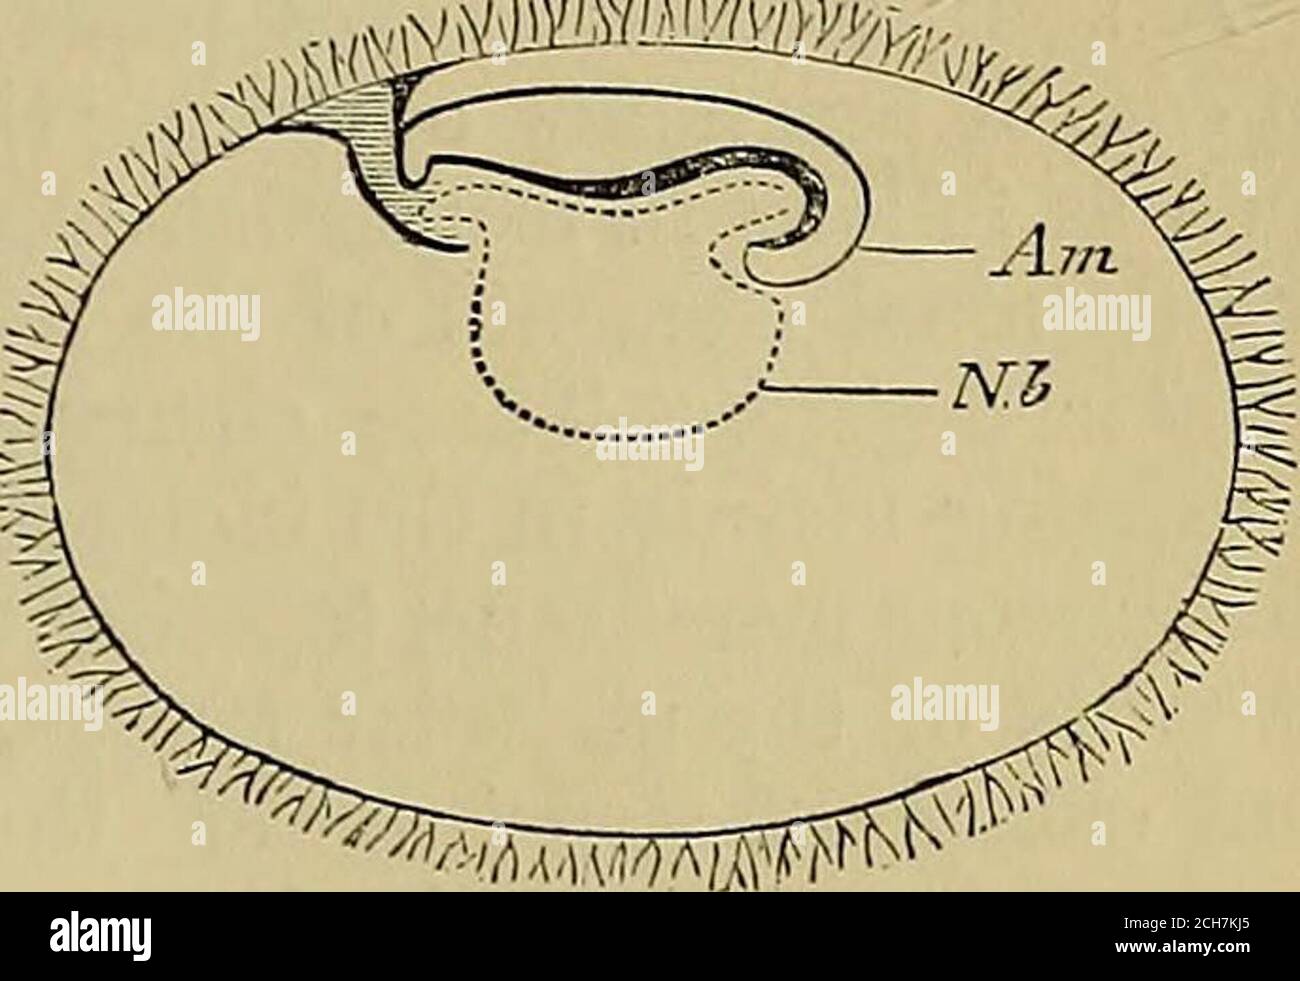 . Quain's elements of anatomy . face, the form of the external auricle, and the form and attitude of the limbs. Fig. 670. Fig. 670.—Diagrammatic section of the EARLY HUMAN OVUM ACCORDING TO HiS. (From Balfour after His).Am, amnion ; Nb, umbilical vesicle. It Avould have been desirable to givesome account at this place of the rate ofprogress and the peculiarities of formand structure belonging to the successivestages of early growth and developmentin the human embryo ; but the want ofspace and the paucity of materials forsuch an account as would be satisfactoryforbid the attempt for the present Stock Photo